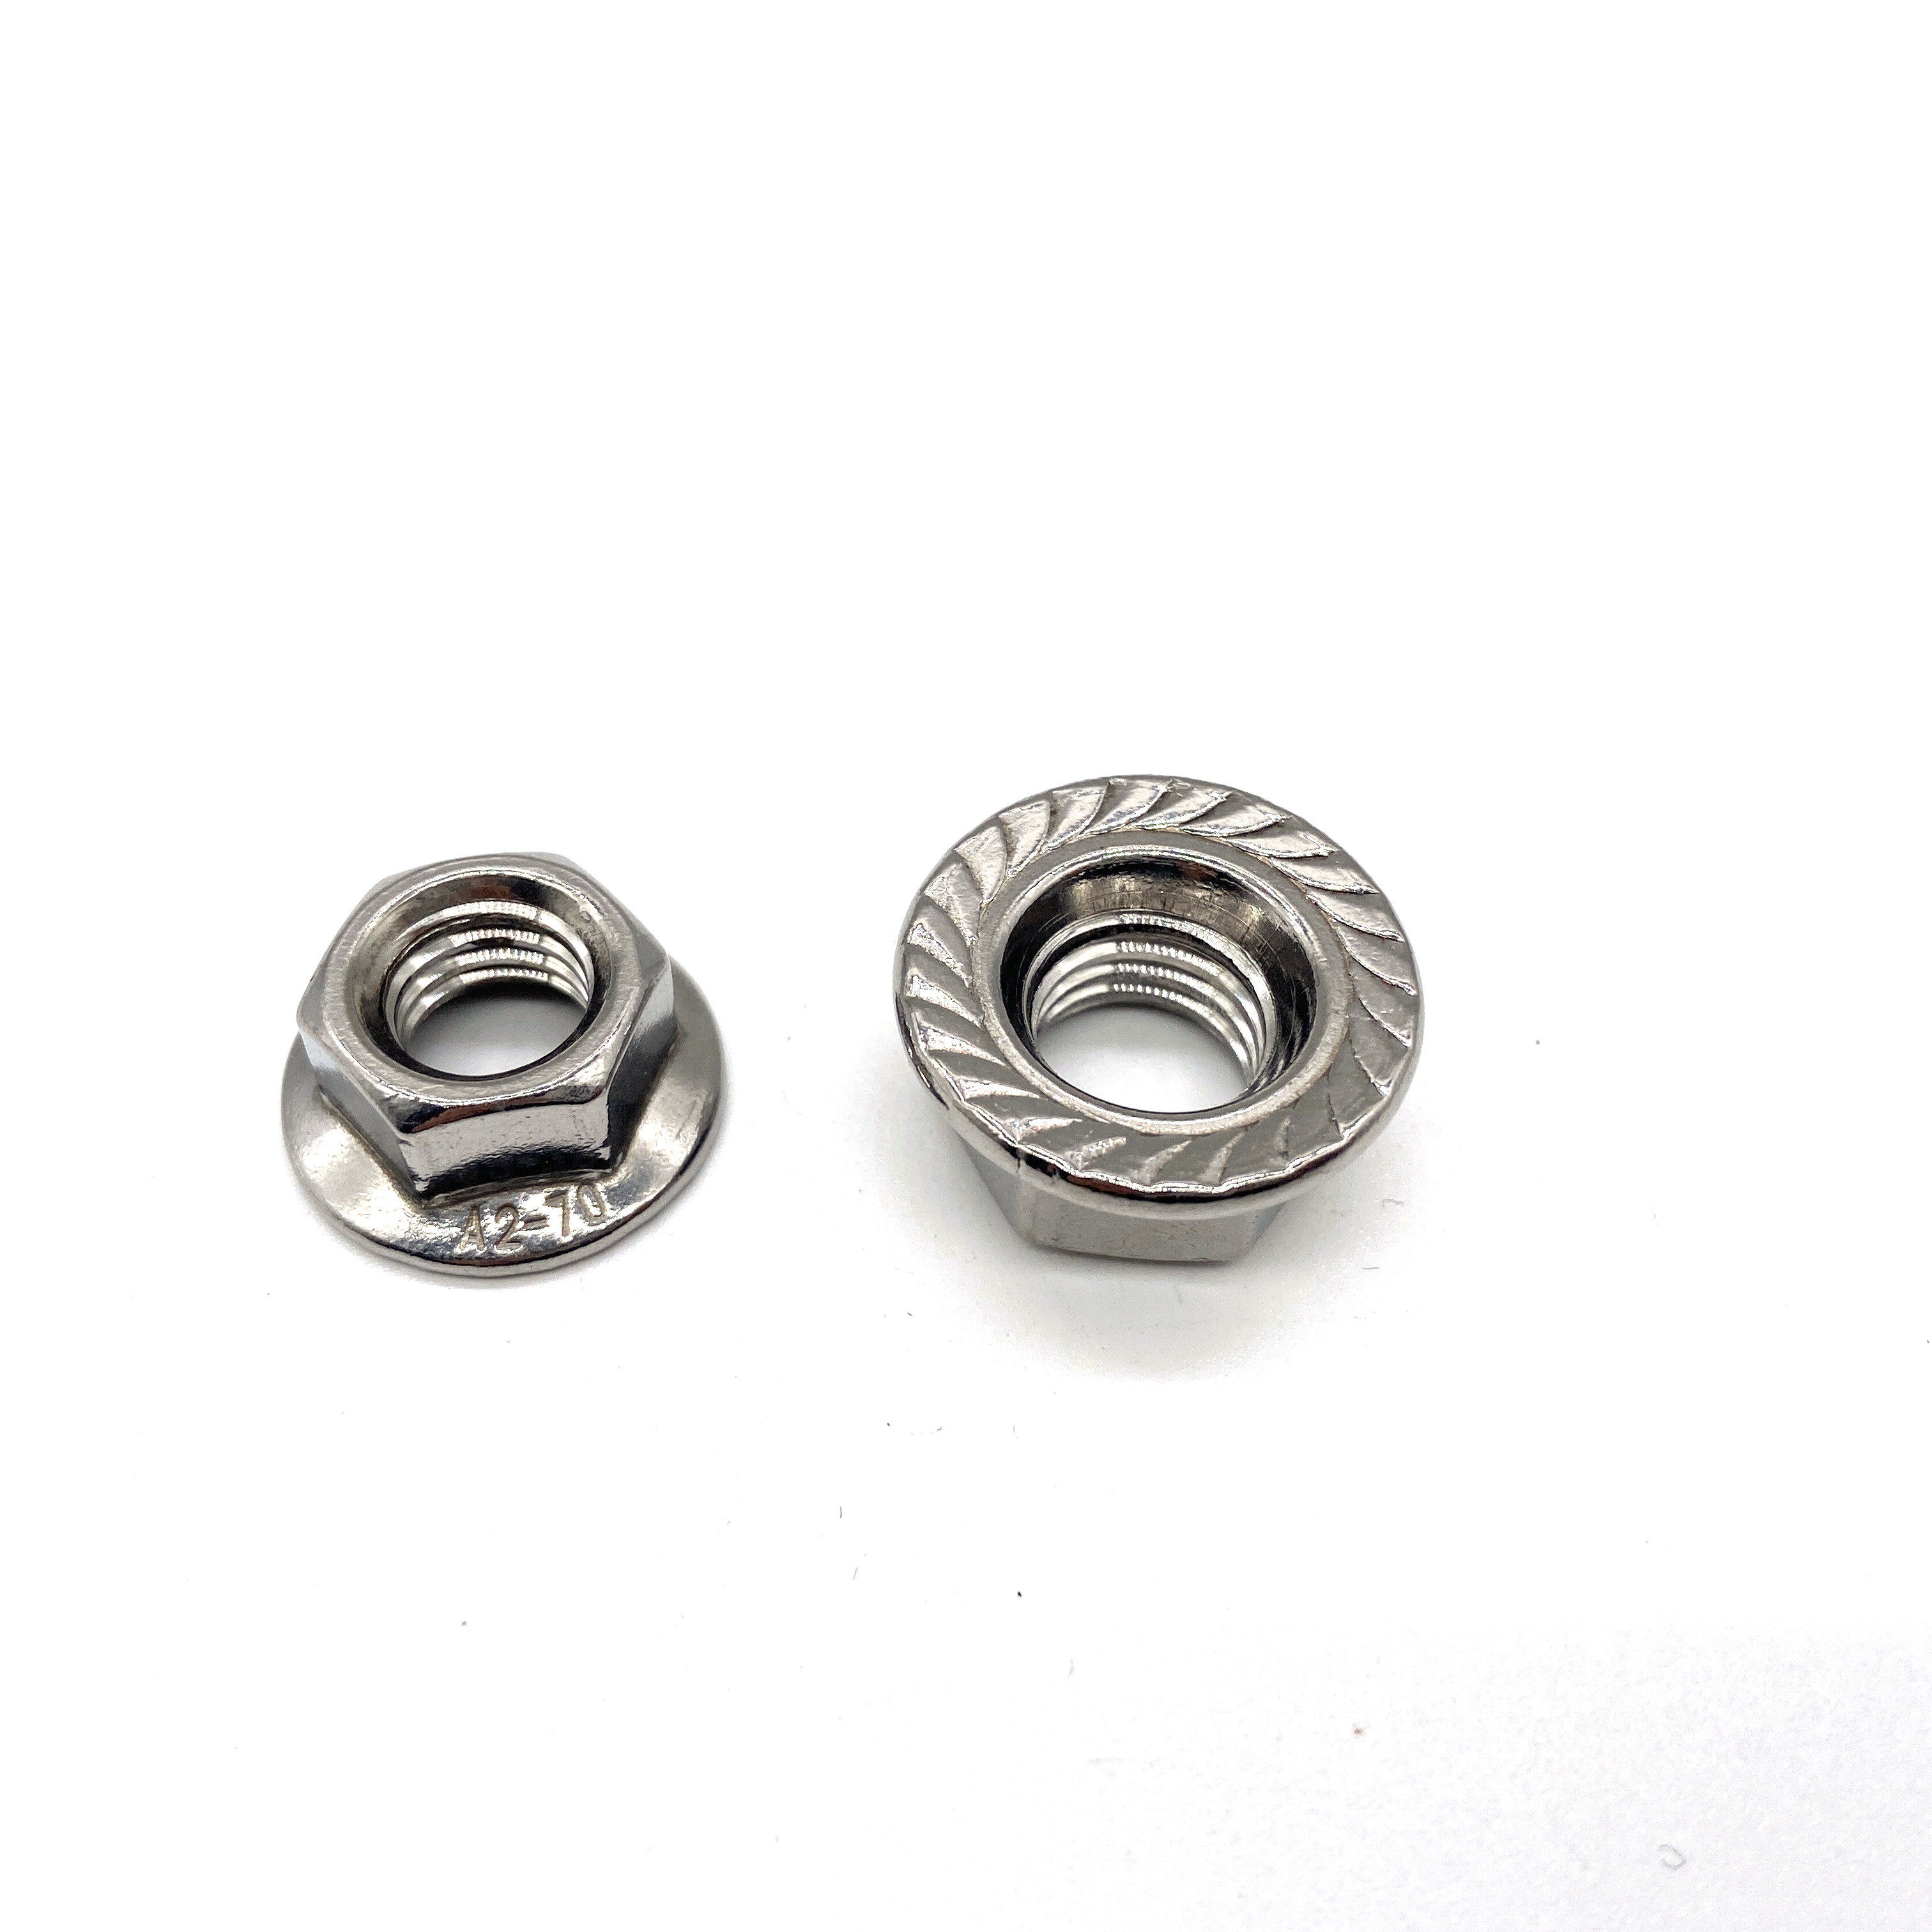  INOX A4 INOX A2 DIN 6923 Factory SS304 SS316 Stainless Hex Flange Nut